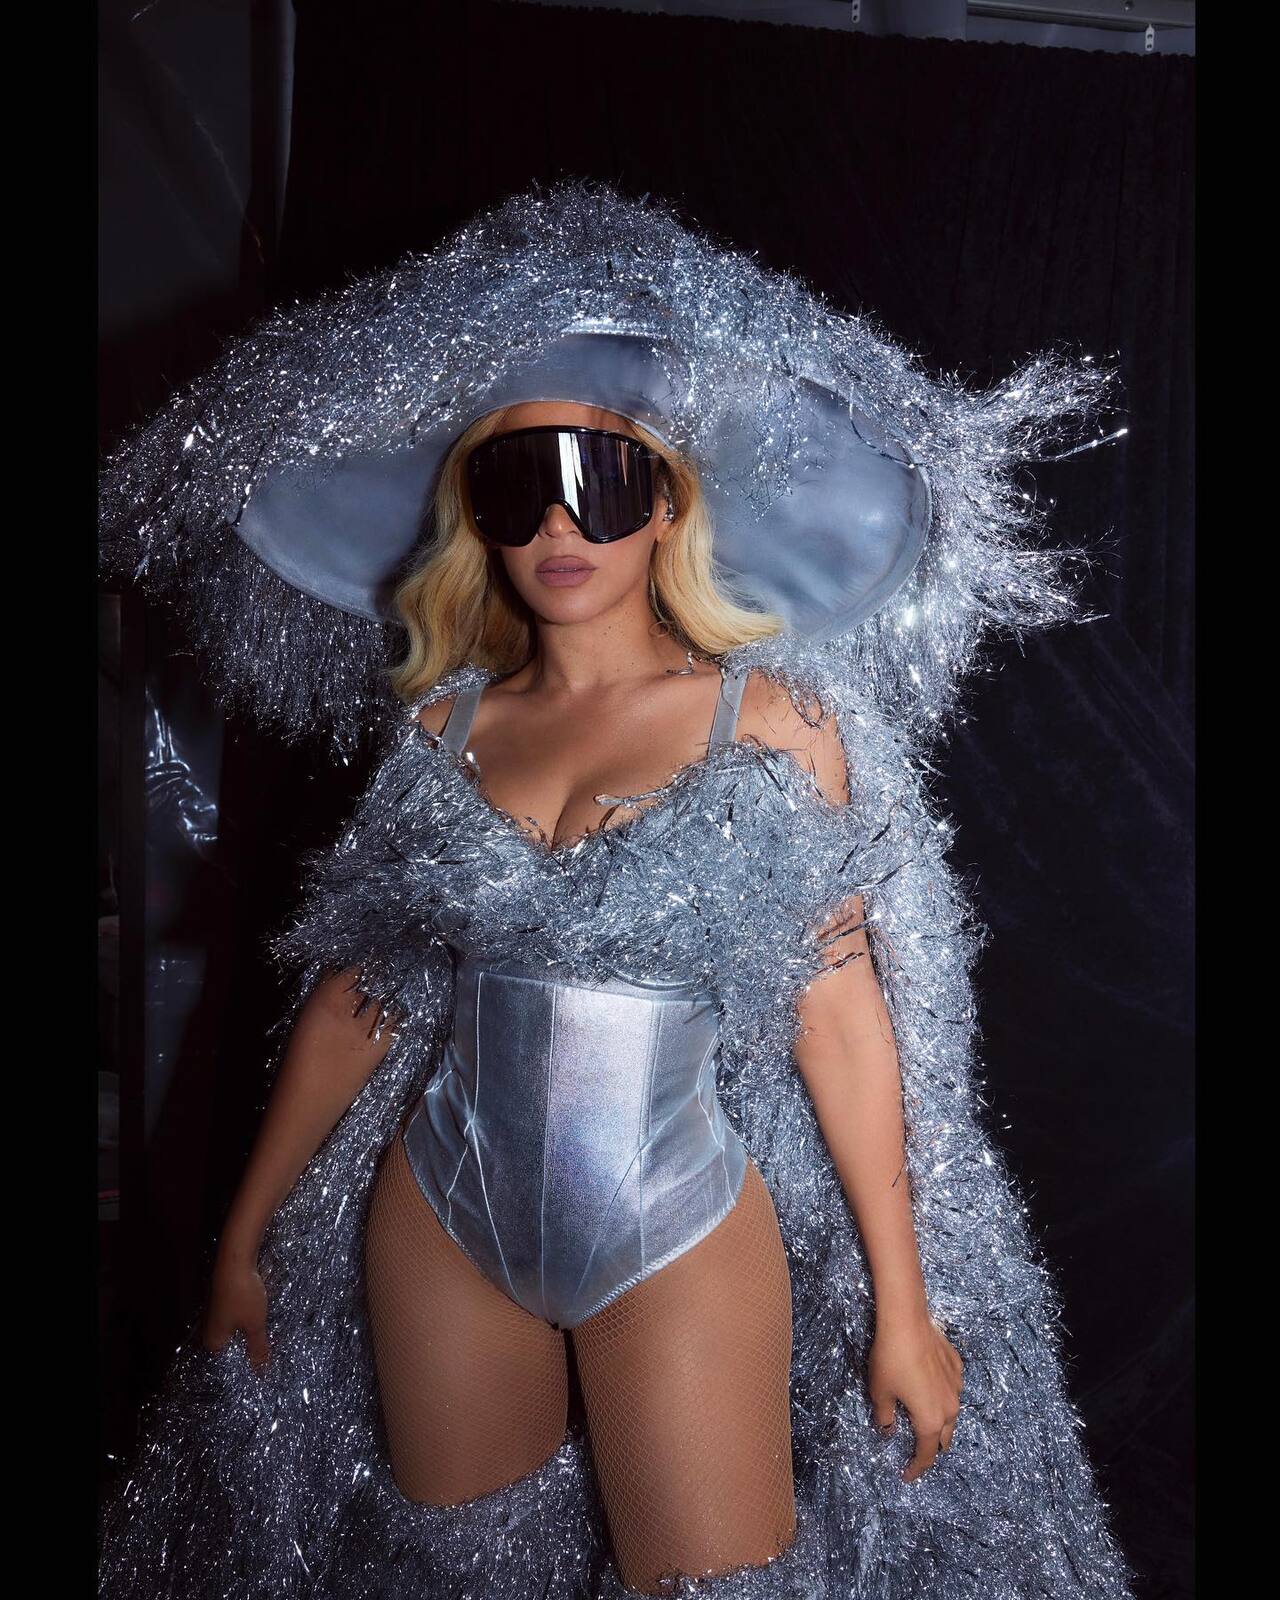 Nothing screams 'queen' like this part-bodysuit, part-silver confettied outfit. And those visors? Beyonce is setting a serious standard when it comes to concert fashion 